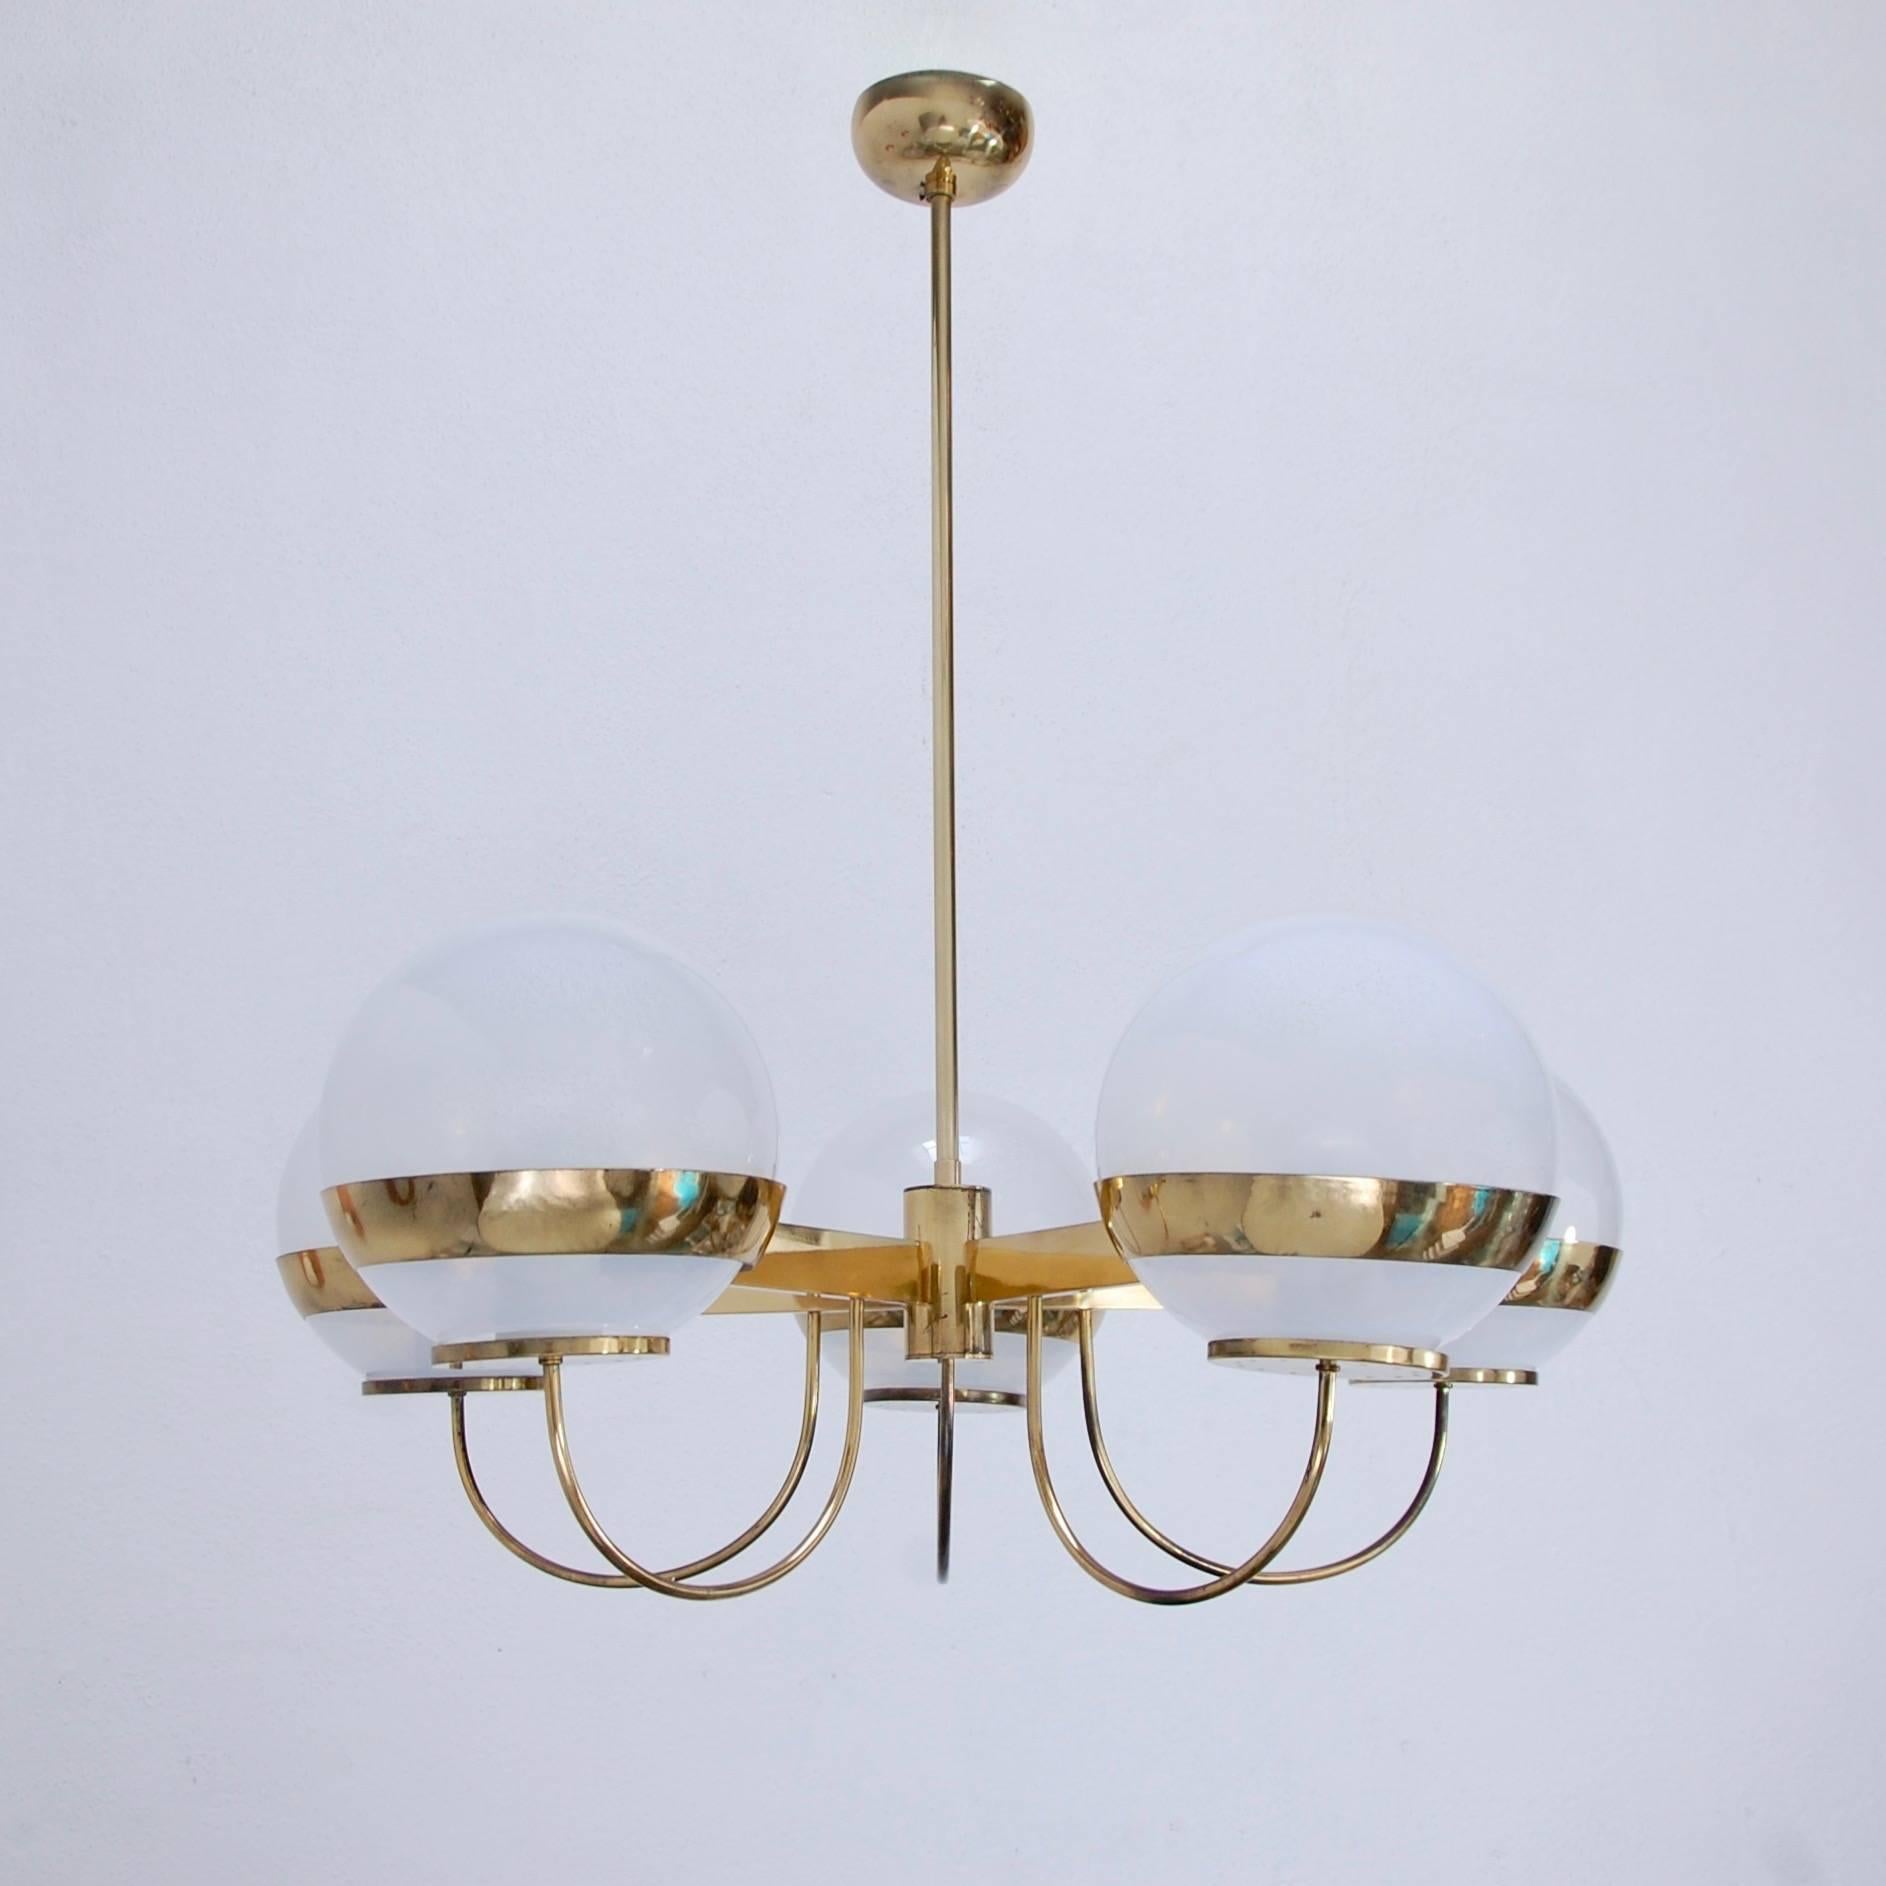 Midcentury Italian Lamperti chandelier in brass and blown glass. Currently wired for the US. Five medium-based E26 sockets. Partially restored.
Measurements:
Fixture height 13”
Diameter 32”
OAD 35”.
 